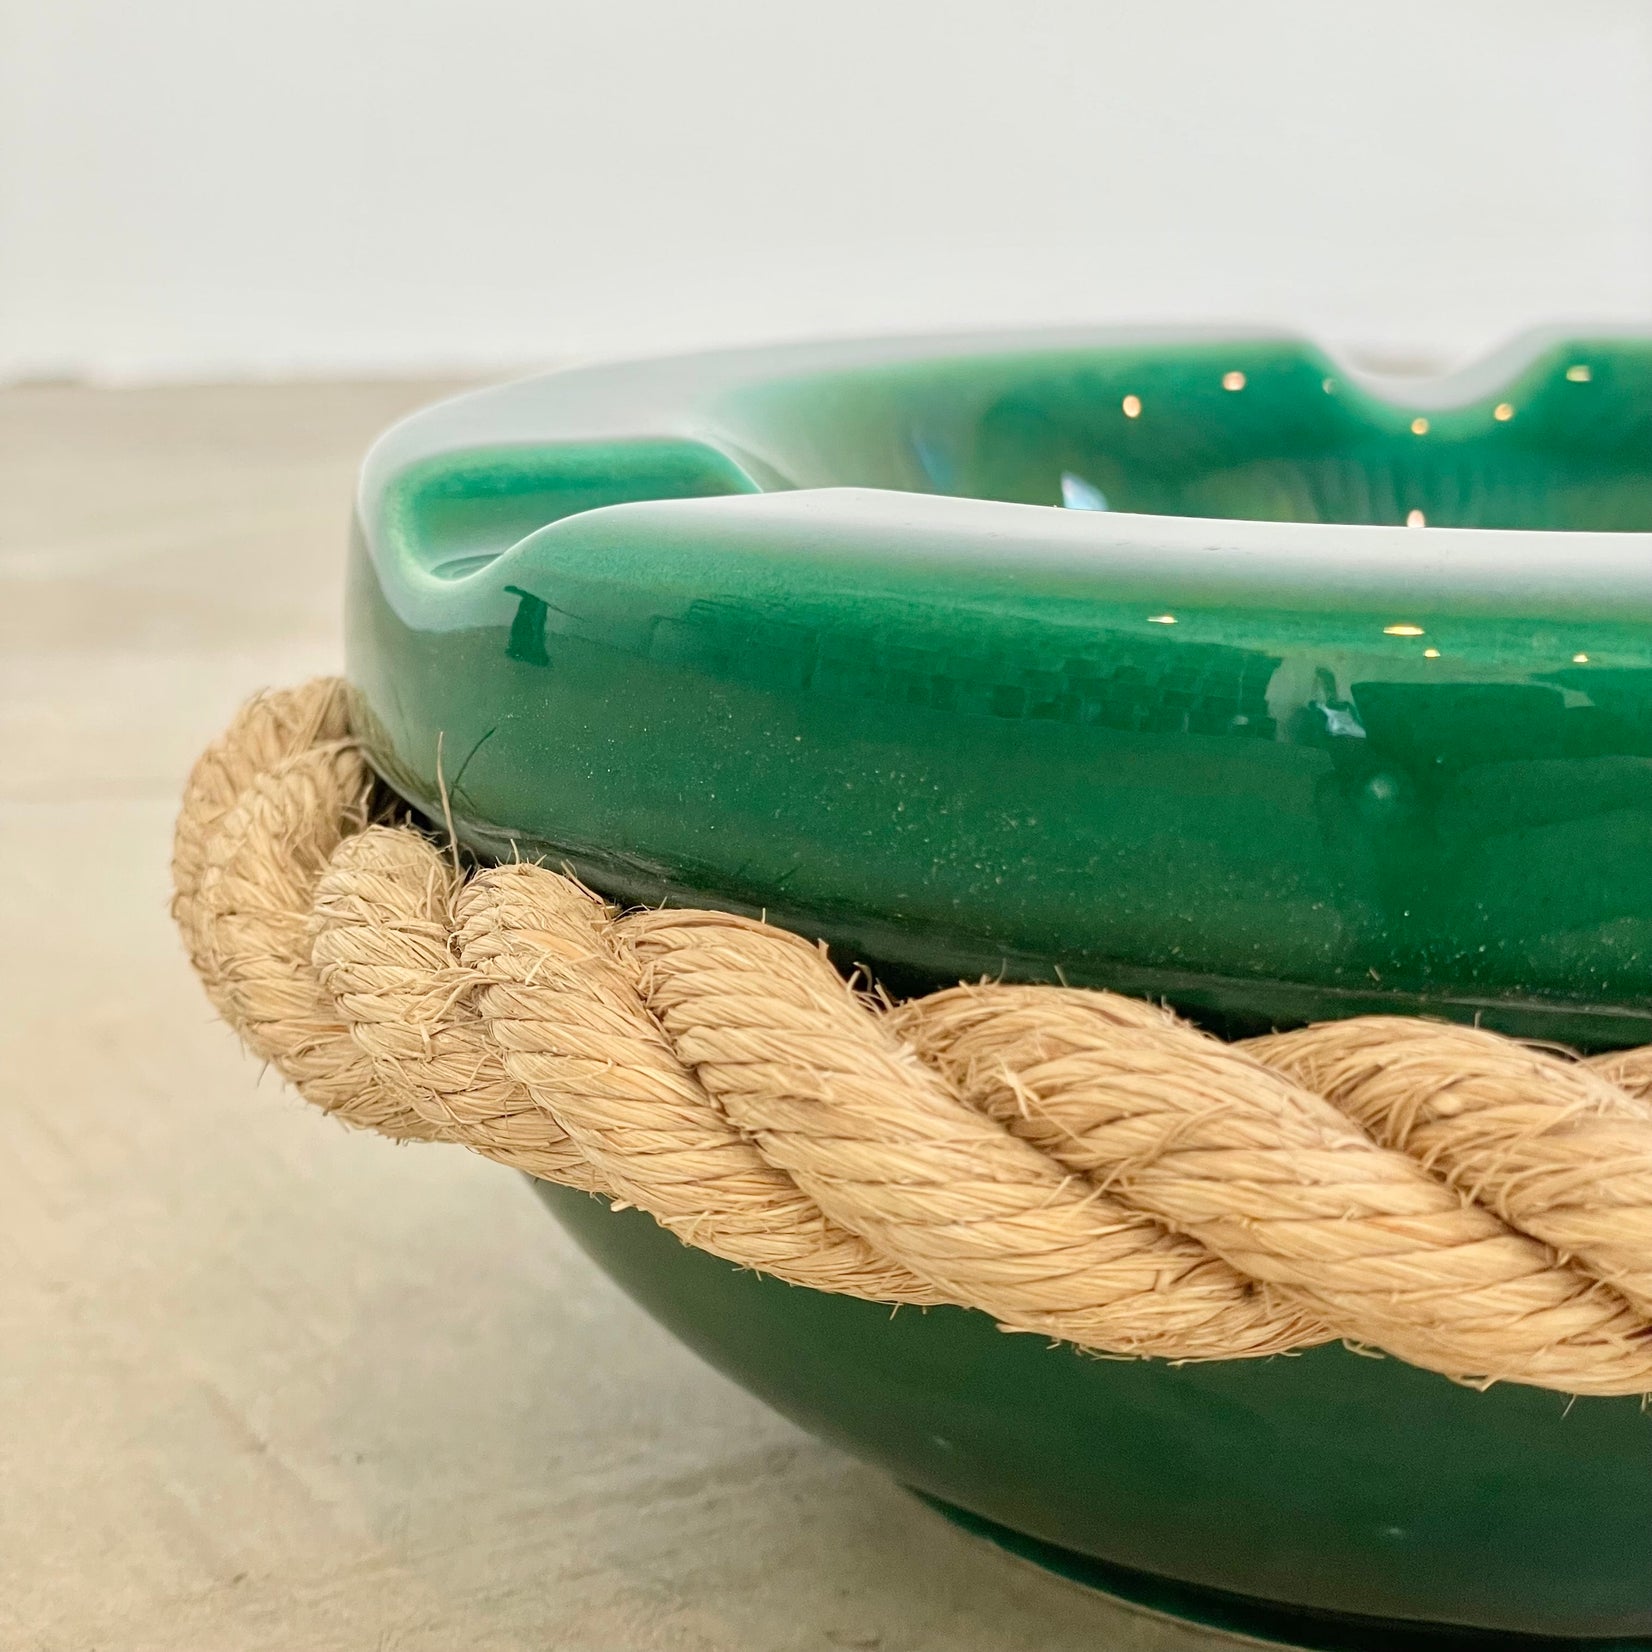 Audoux Minet Style Green Ceramic Ashtray with Rope, 1970s France